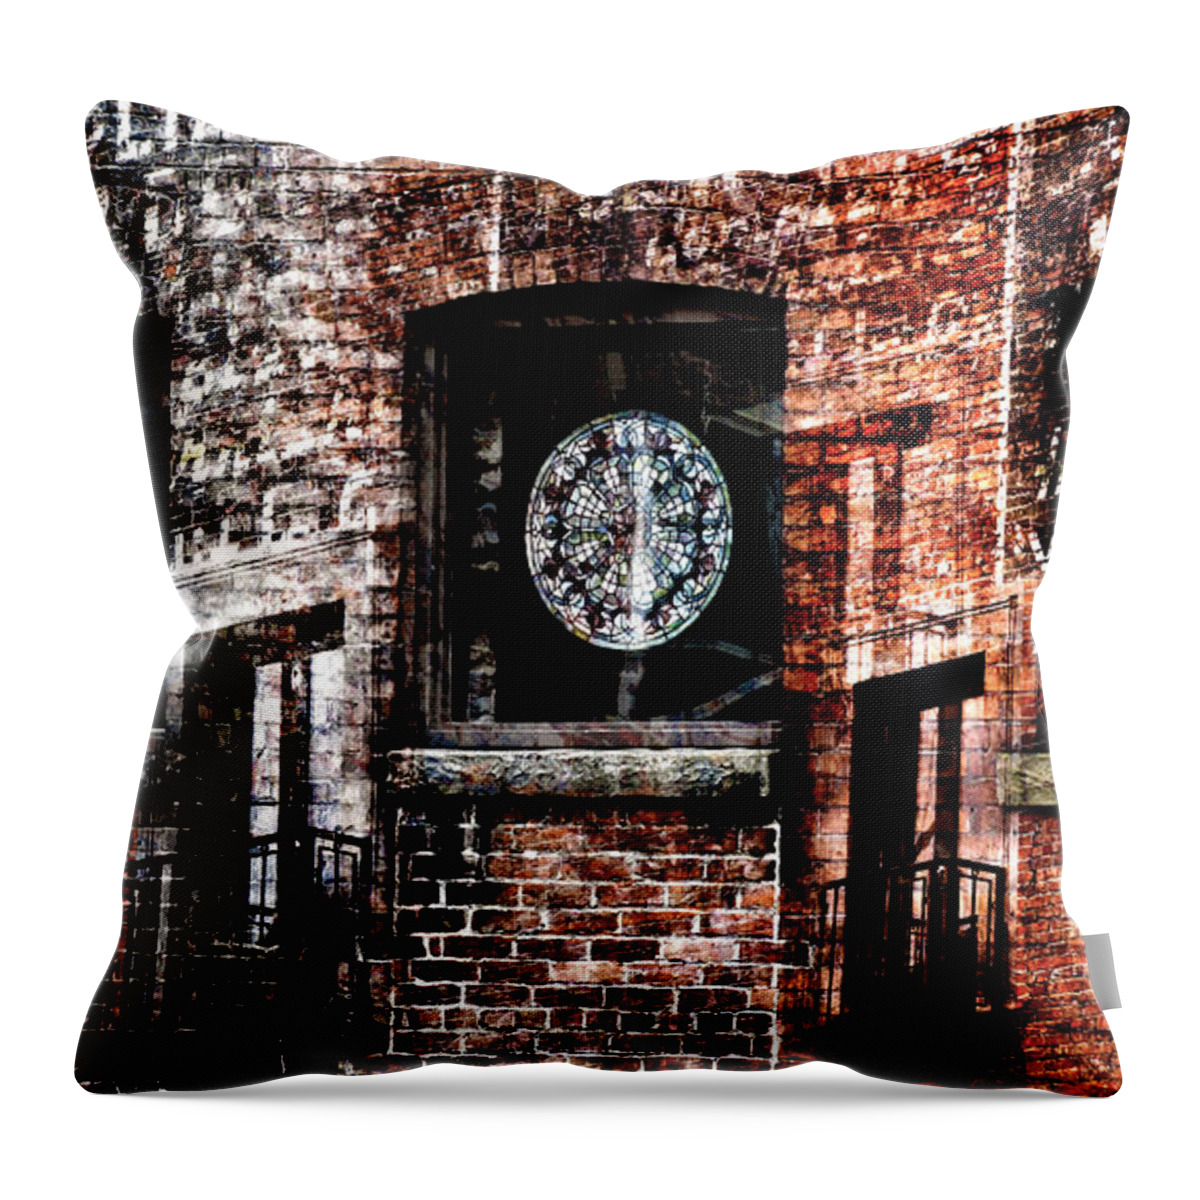 Stained Glass Window Throw Pillow featuring the digital art Stained Brick by Abby Kirsch